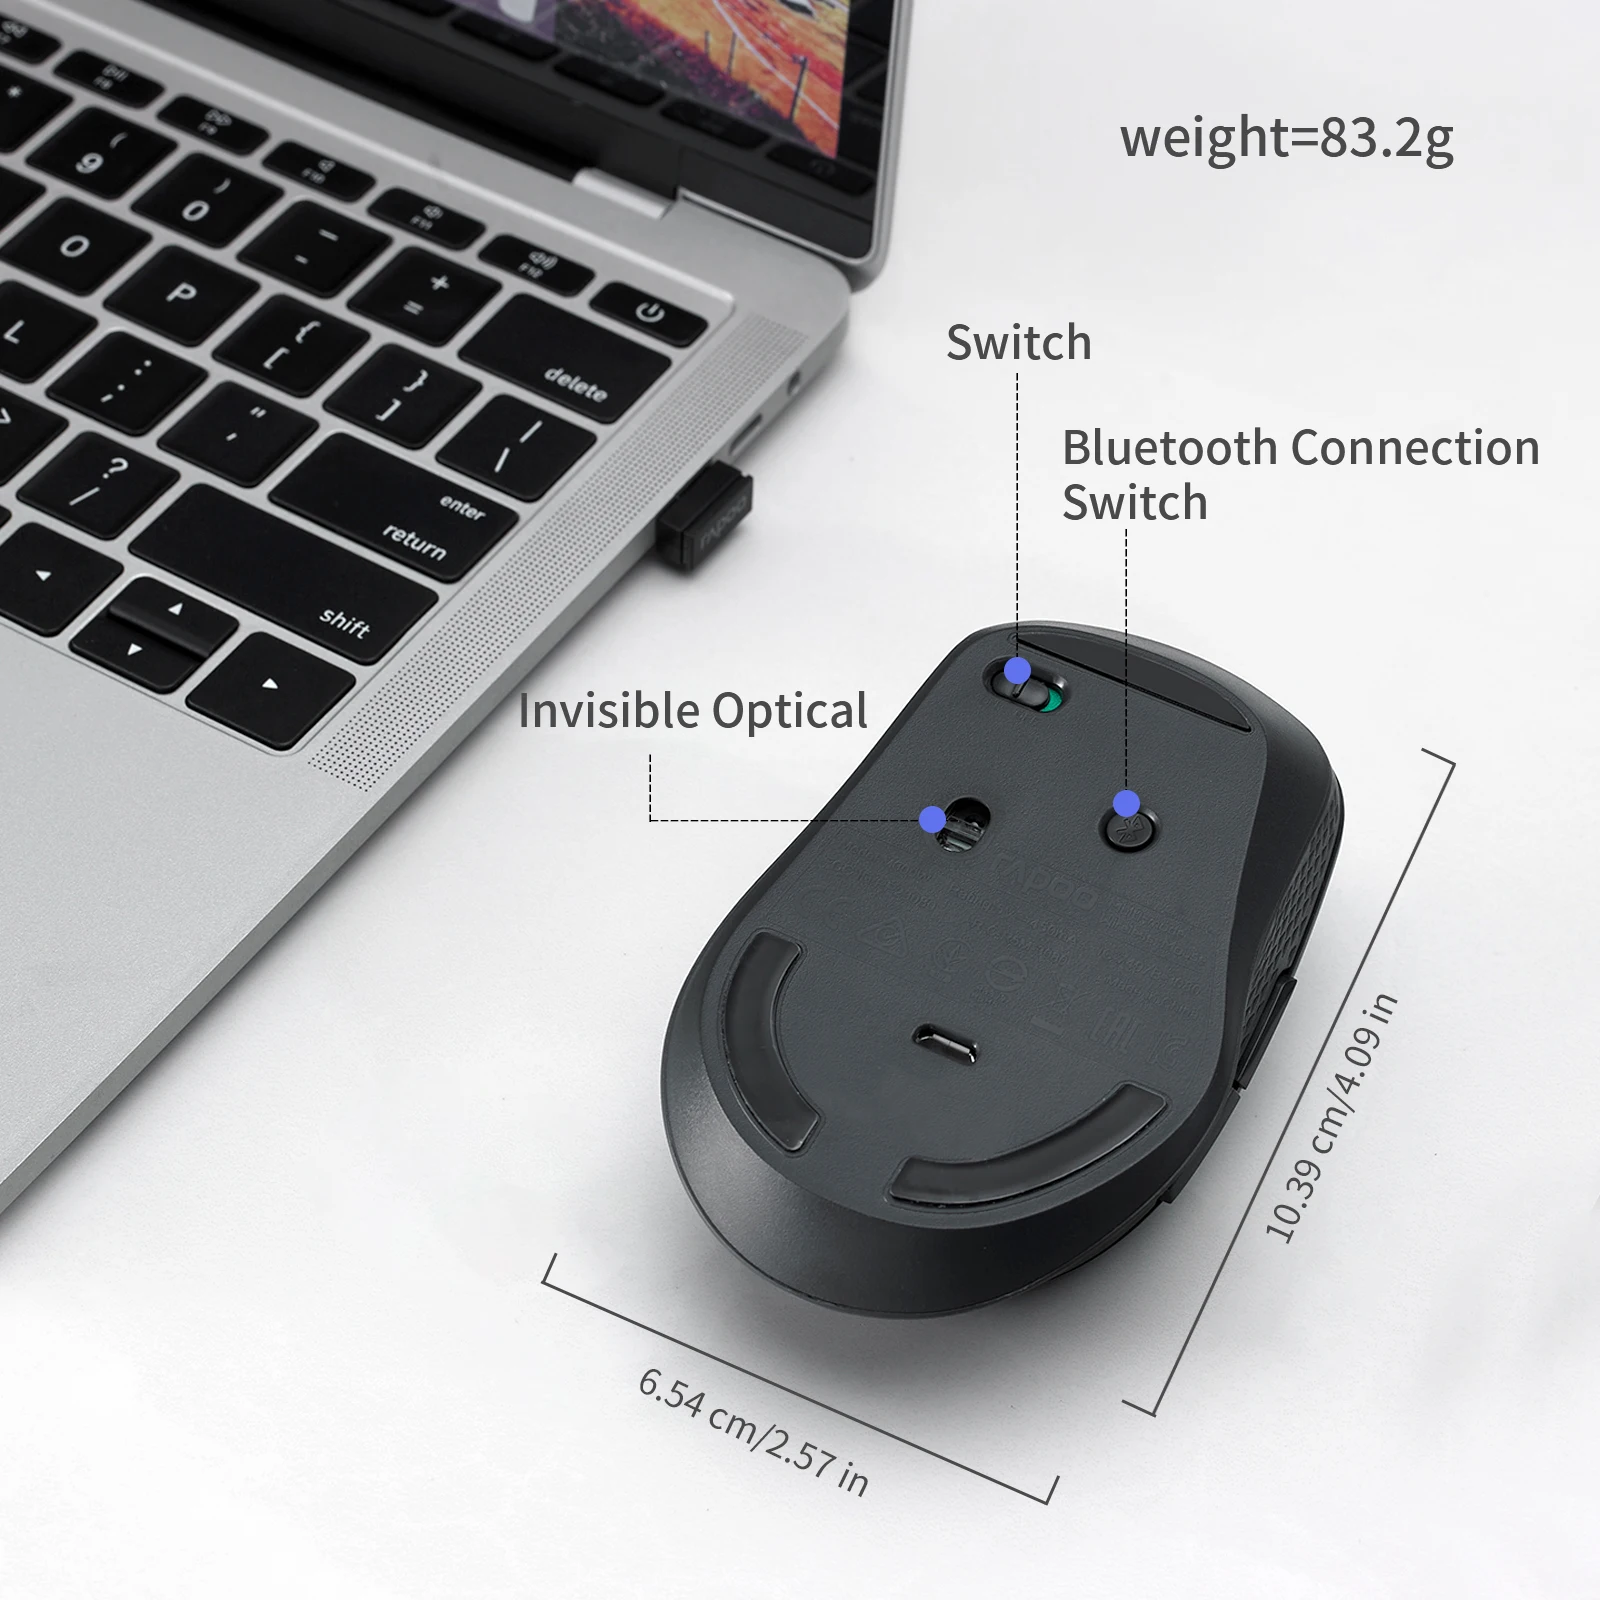 Bluetooth Wireless With USB Receiver Mouse Multi-Mode Wireless Mouse For Laptop Computer PC Macbook Mouse 2.4GHz 1600DPI images - 6